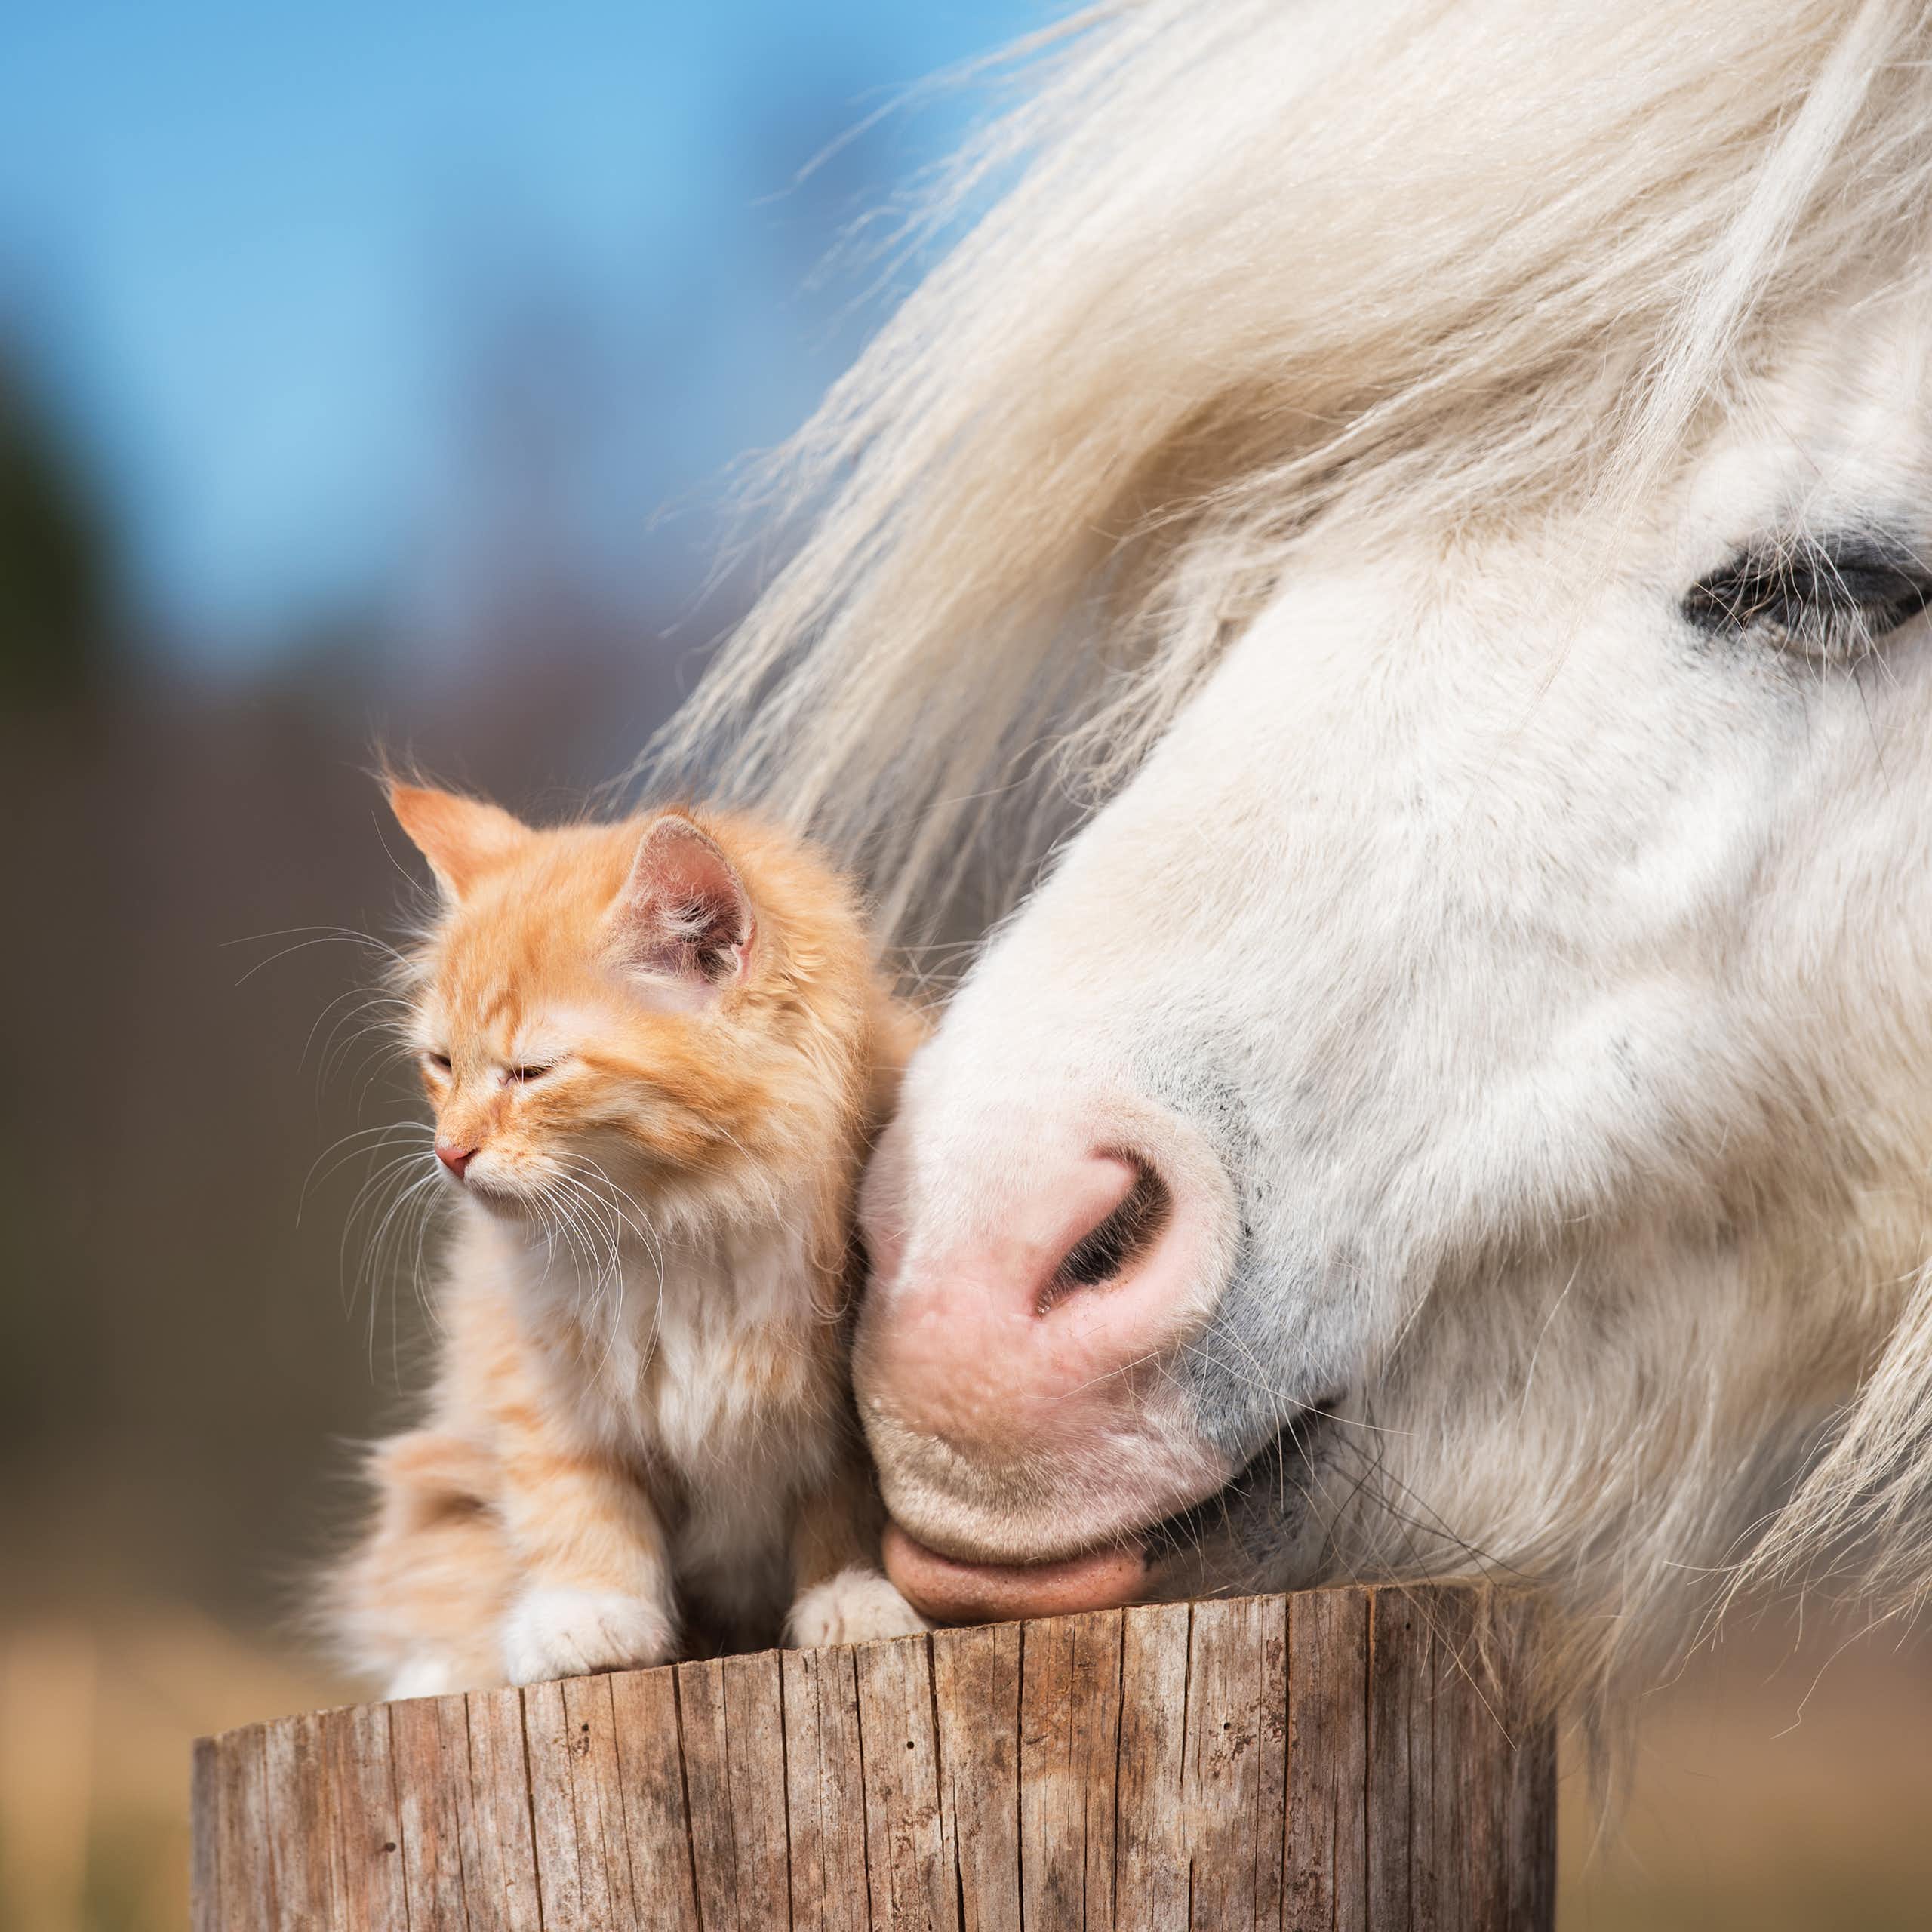 Why do we love to see unlikely animal friendships? A psychology expert explains